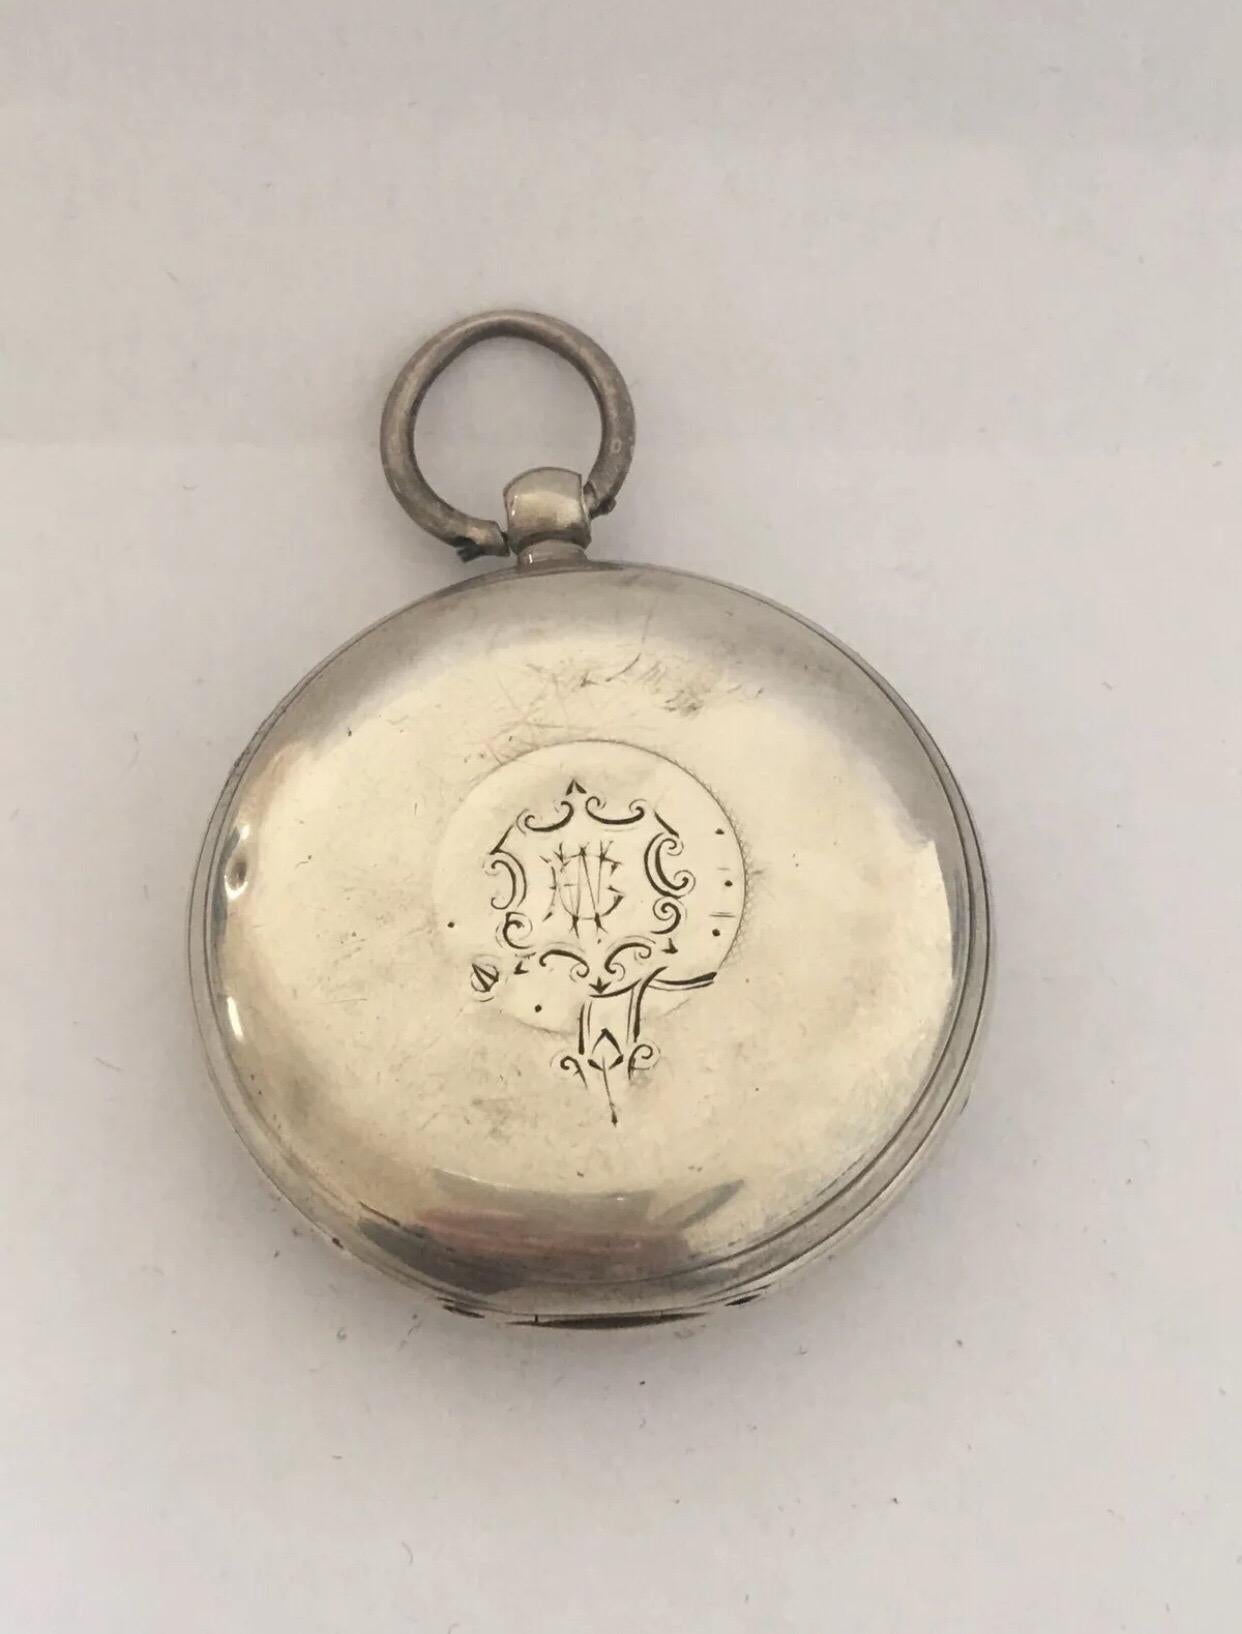 Antique Silver Pocket Watch Signed L Lieger Glasgow In Fair Condition For Sale In Carlisle, GB